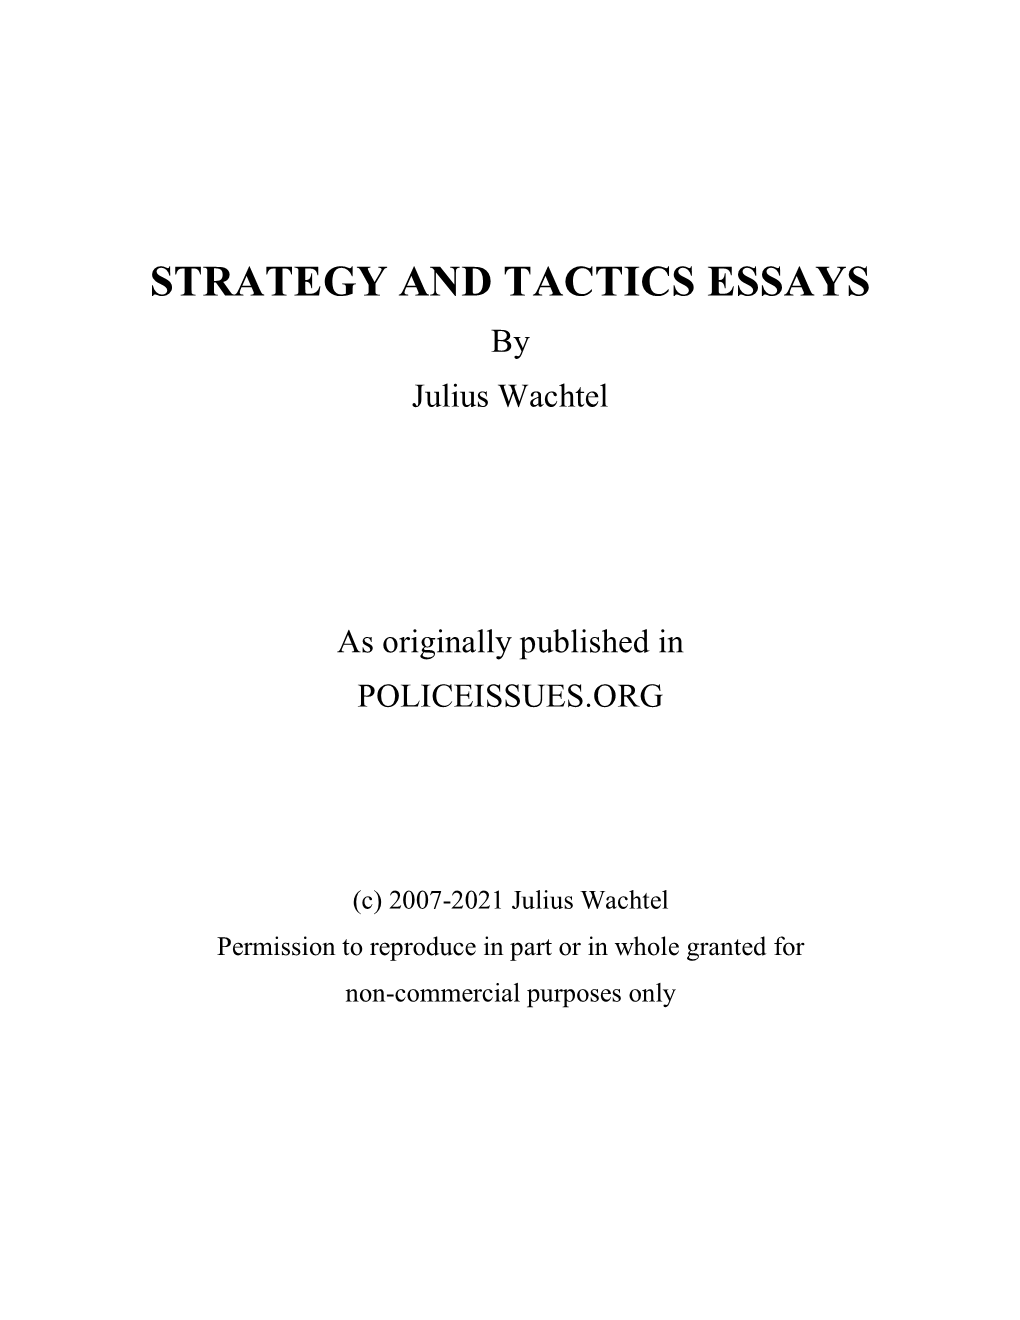 STRATEGY and TACTICS ESSAYS by Julius Wachtel